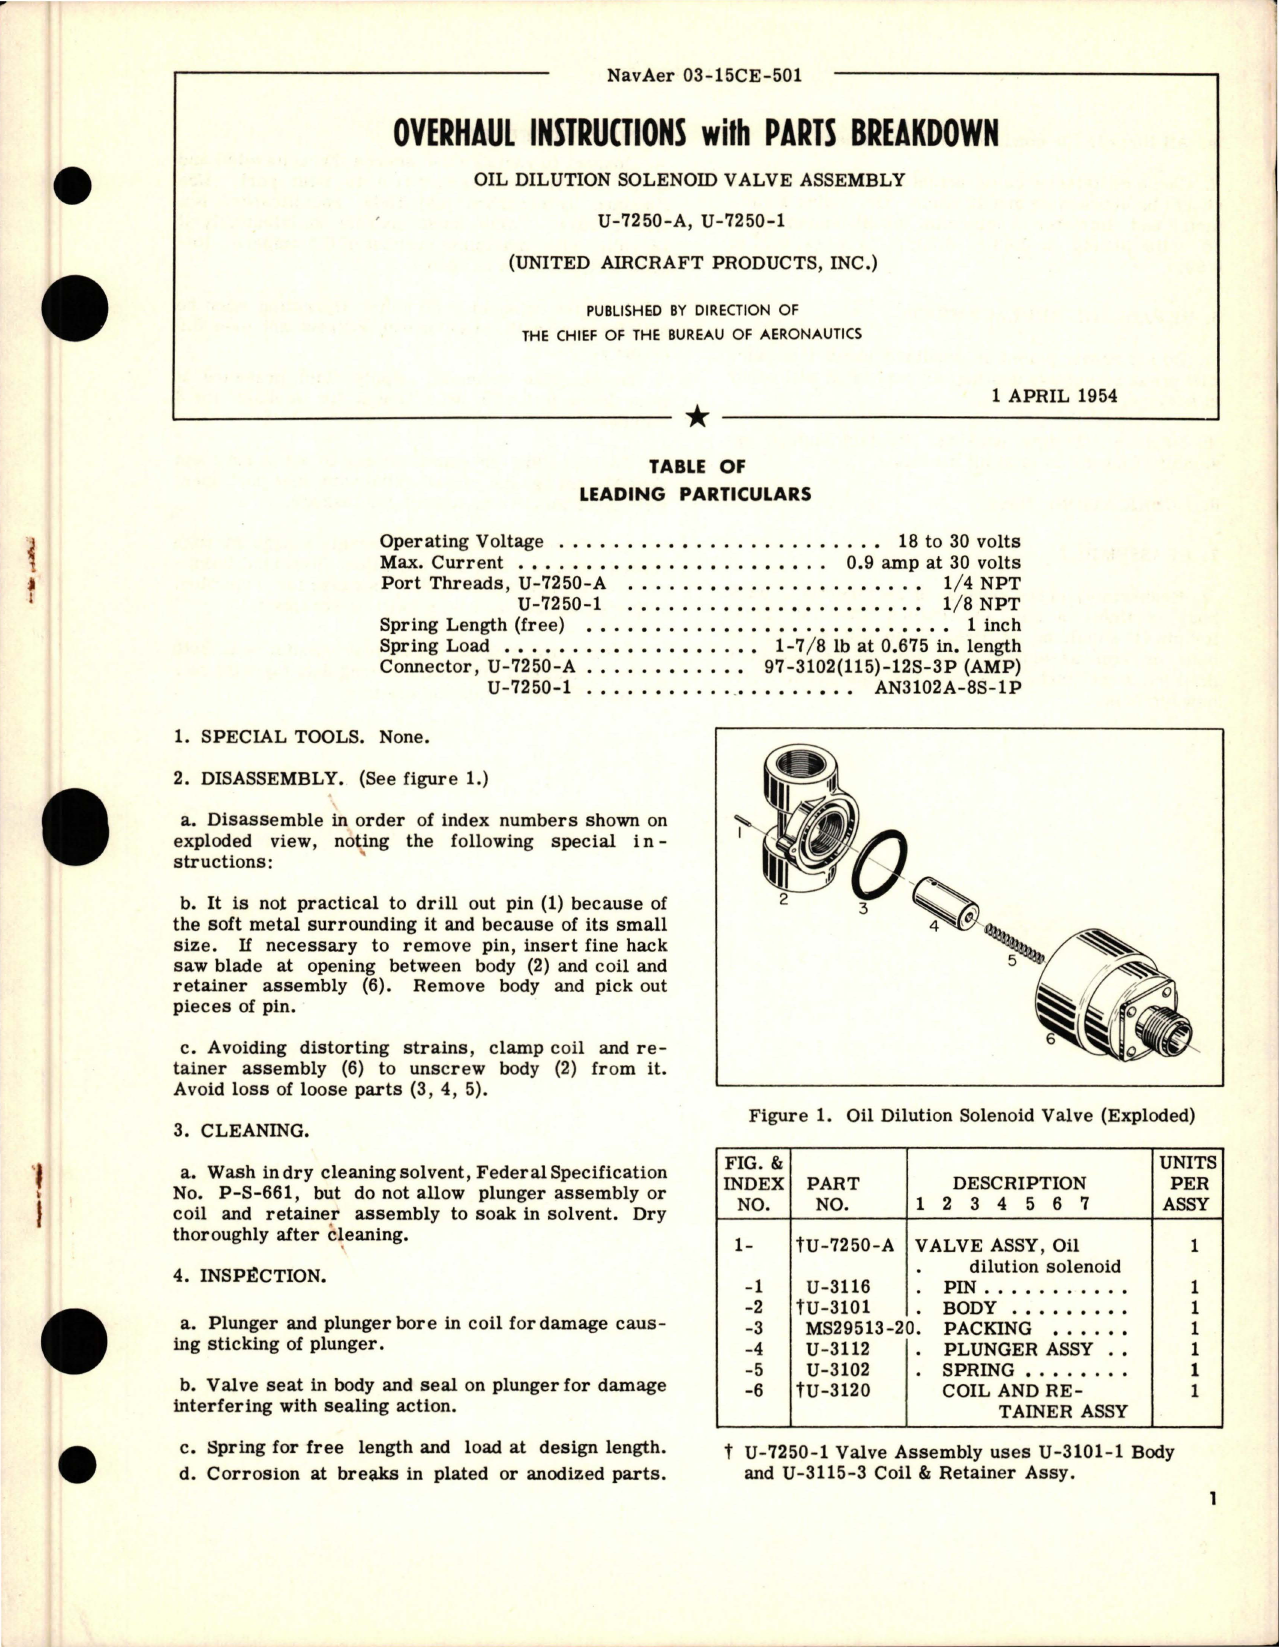 Sample page 1 from AirCorps Library document: Overhaul Instructions with Parts Breakdown for Oil Dilution Solenoid Valve Assembly - U-7250-A and U-7250-1